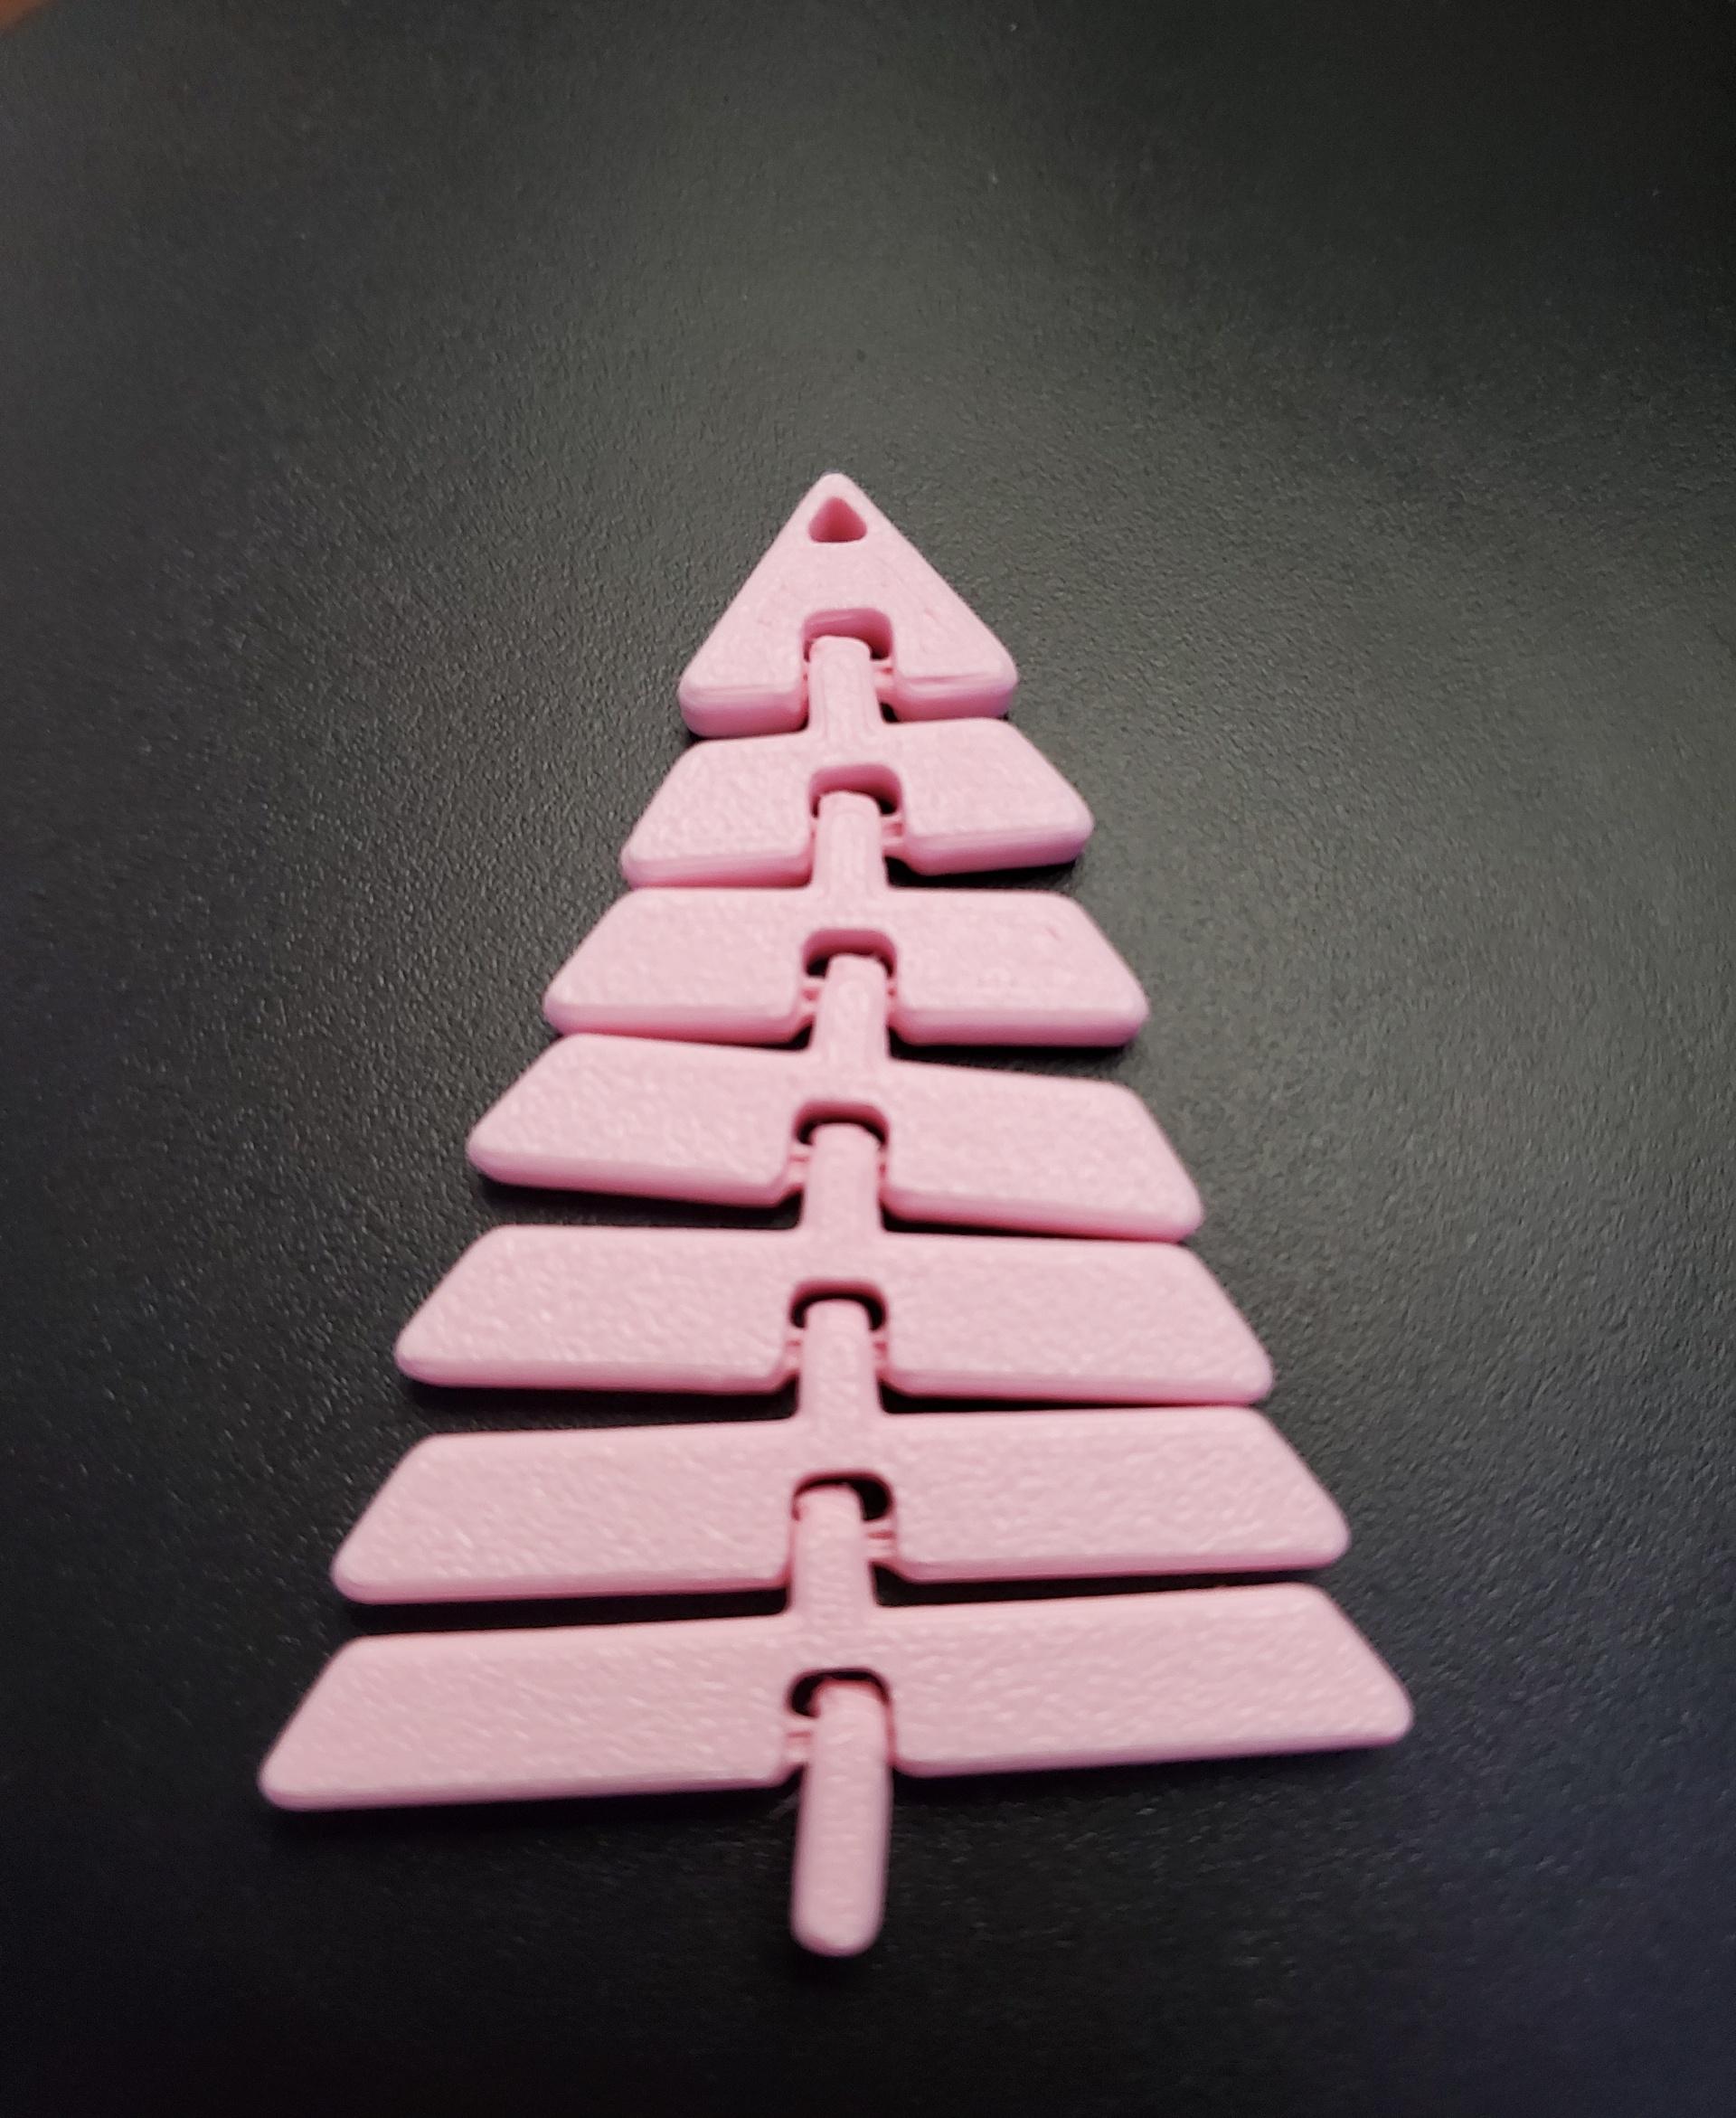 Articulated Christmas Tree Keychain - Print in place fidget toy - polyterra sakura pink - 3d model